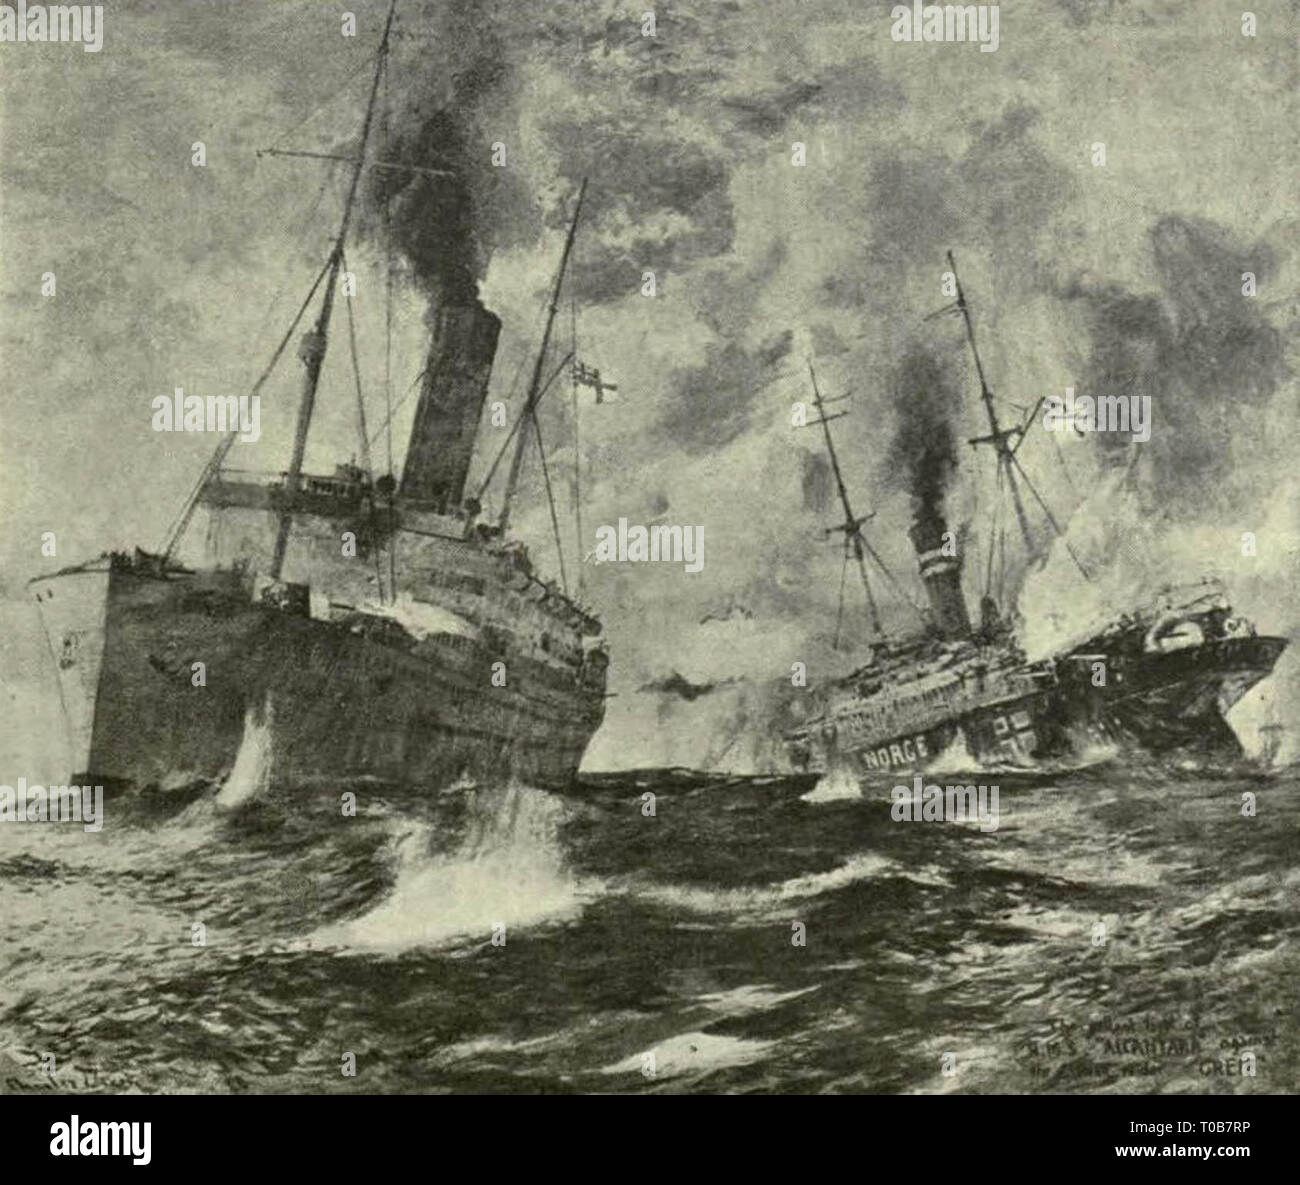 HMS Alcantara engages the German raider Grief on 29 February 1916, in the North Sea. Both ships sank. Stock Photo